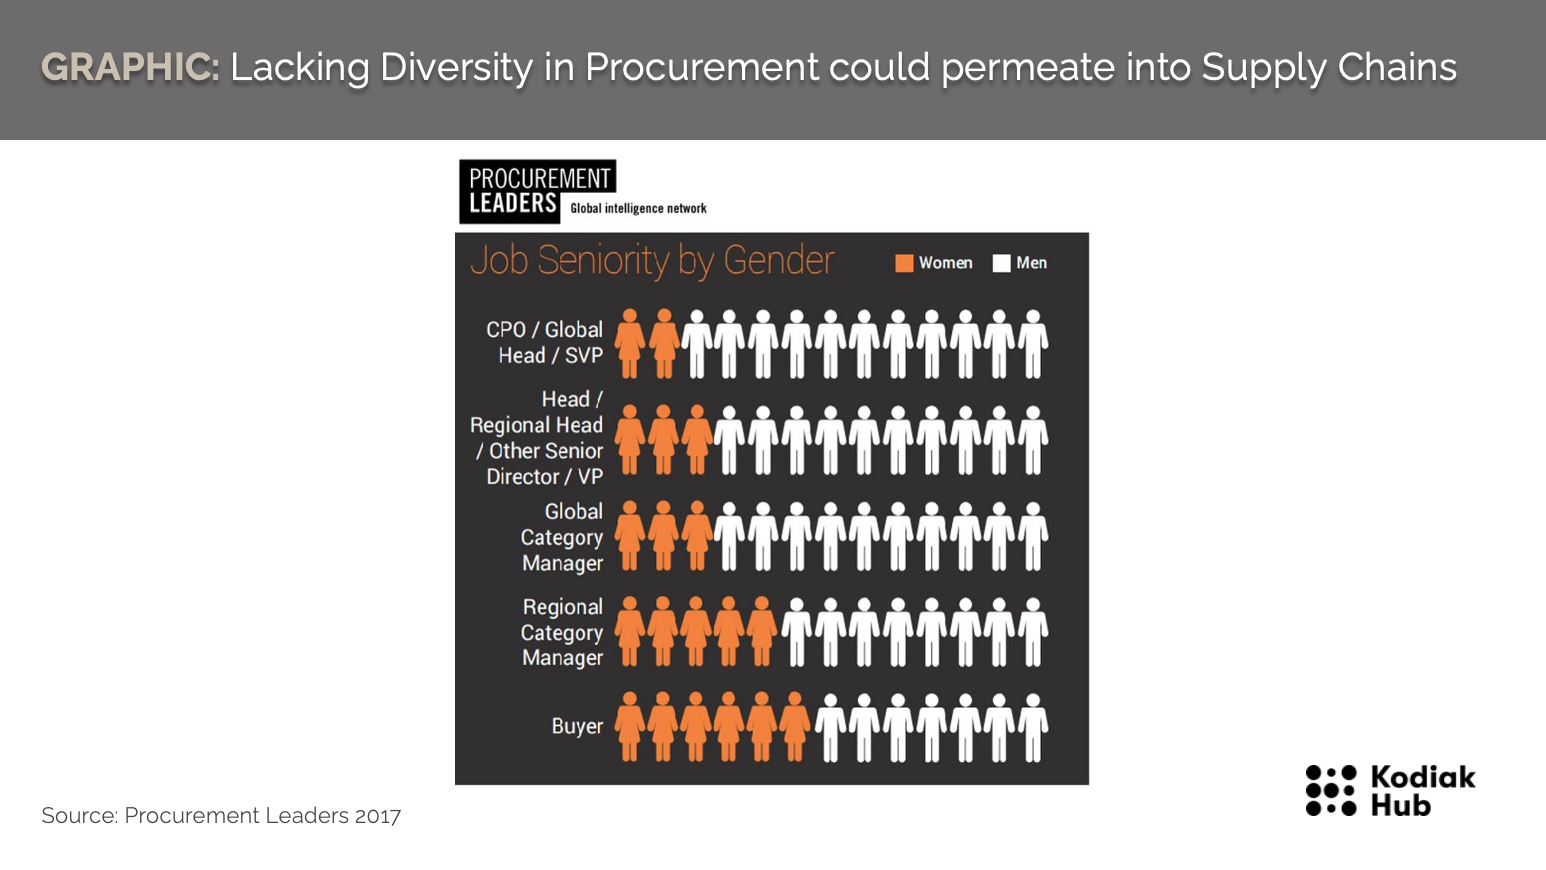 Lacking Diversity in Procurement could permeate into supply chains